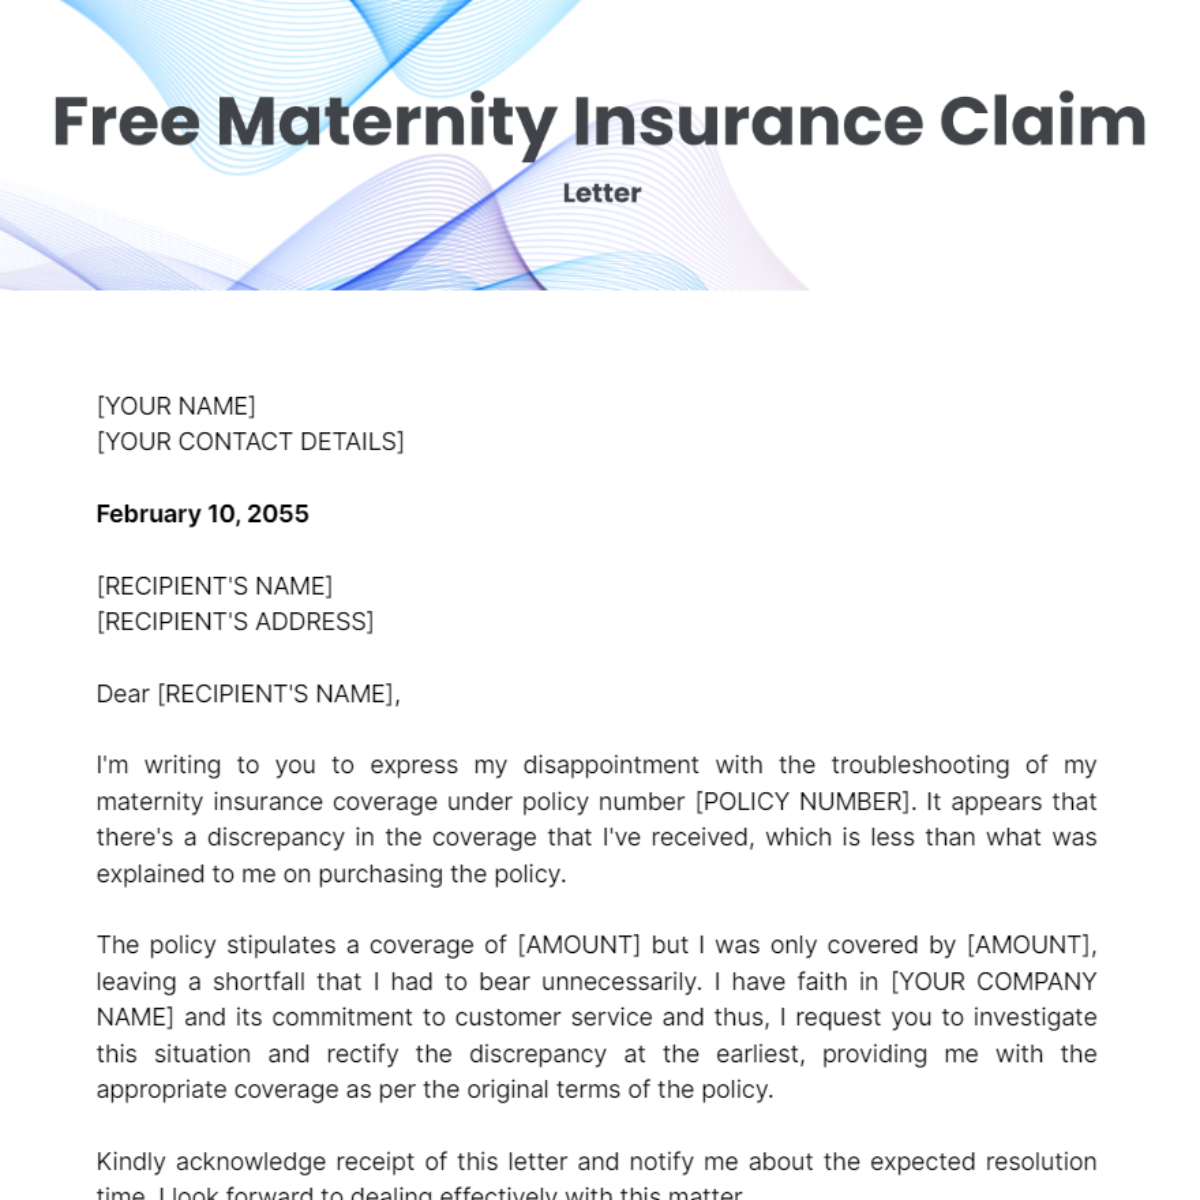 Maternity Insurance Claim Letter Template - Edit Online & Download Example